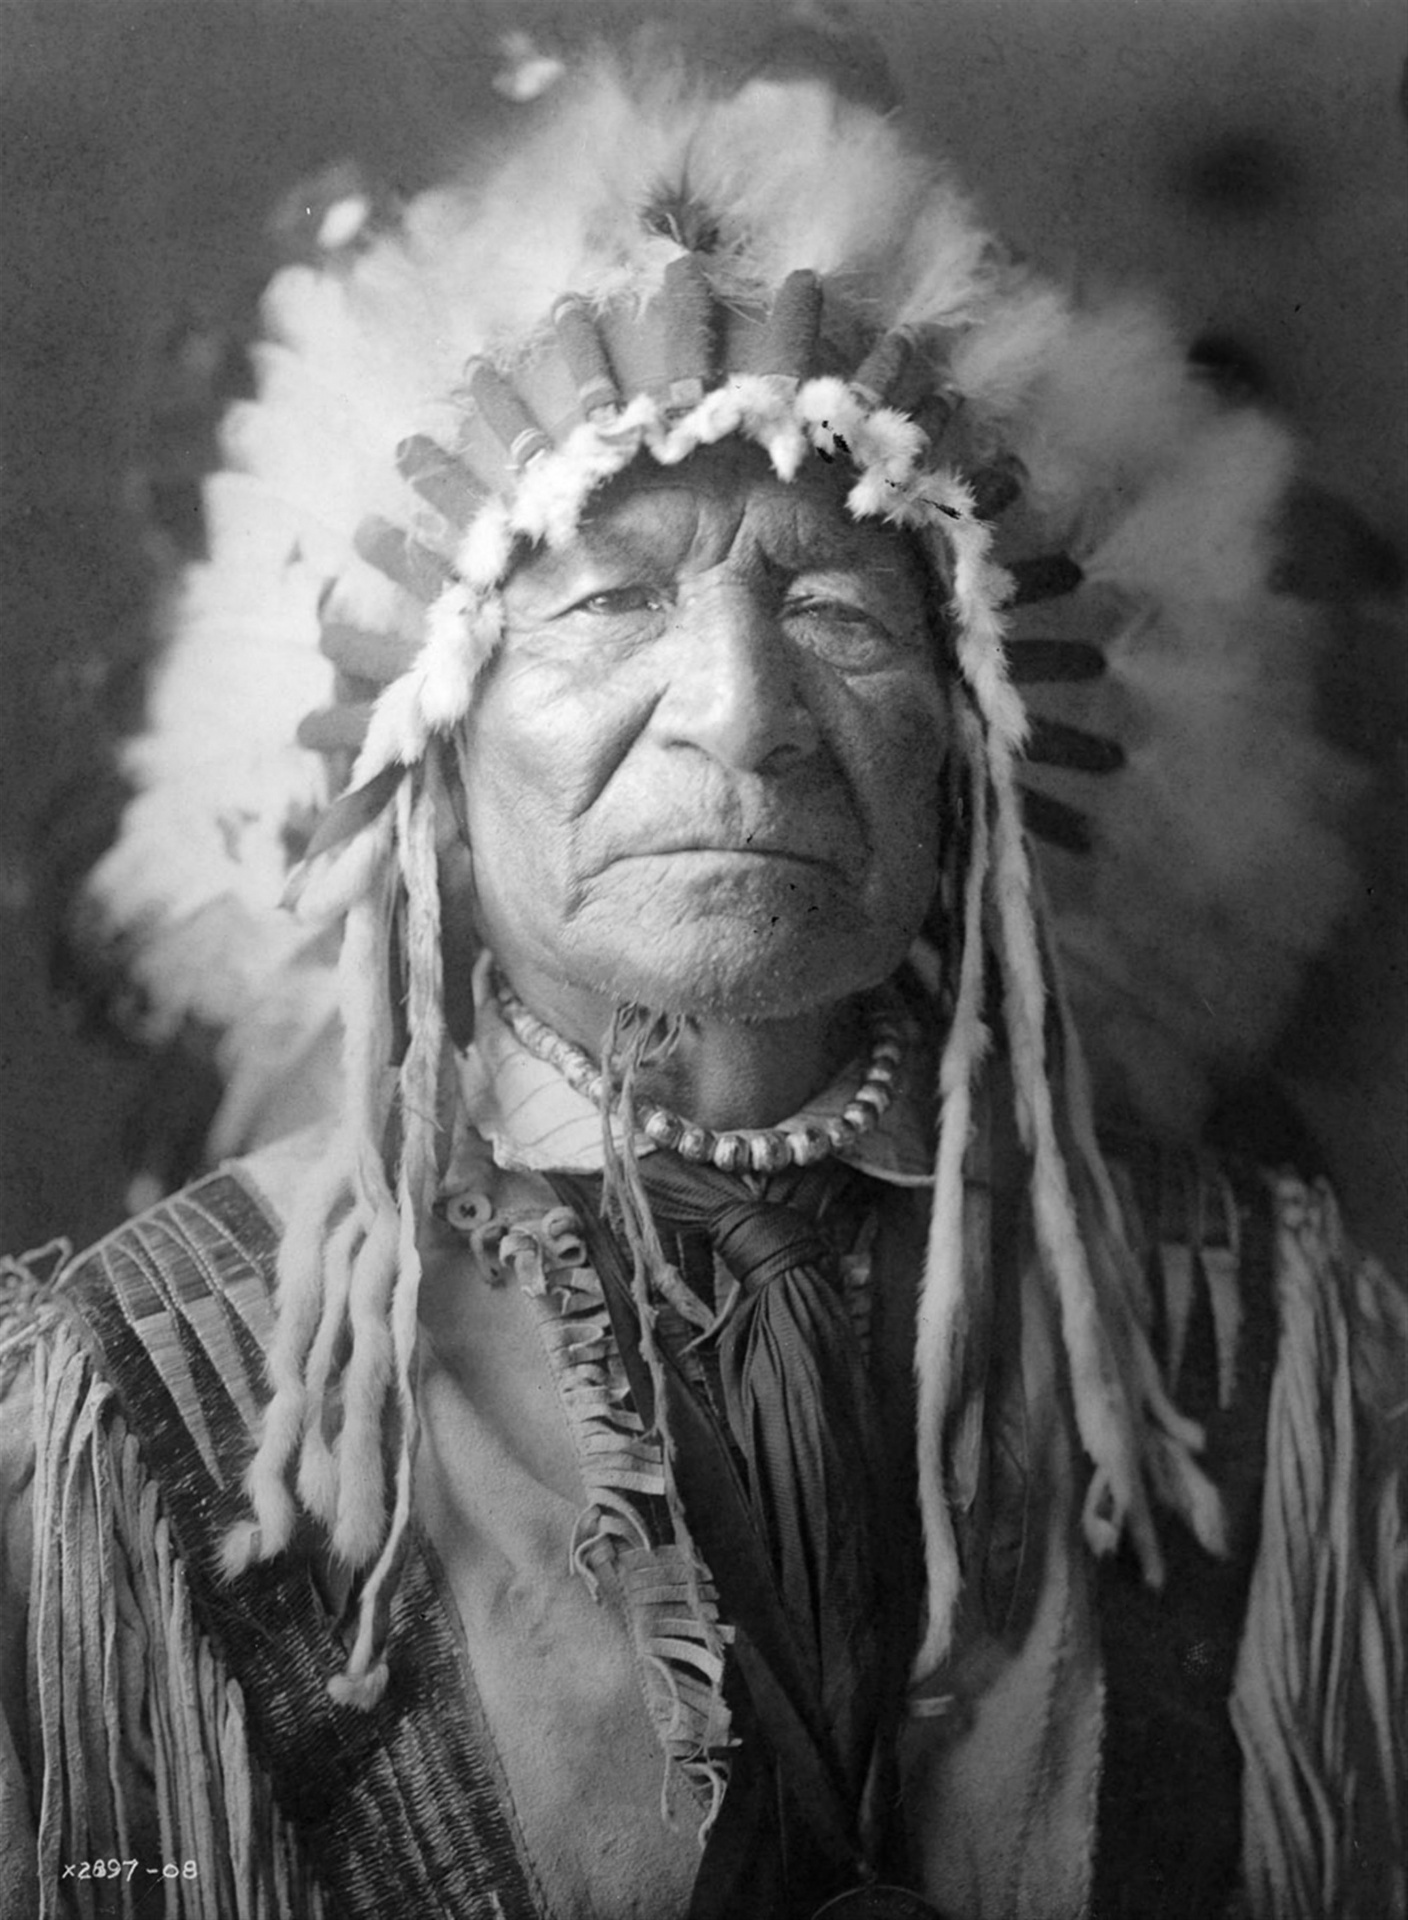 Historical Indian American Chief